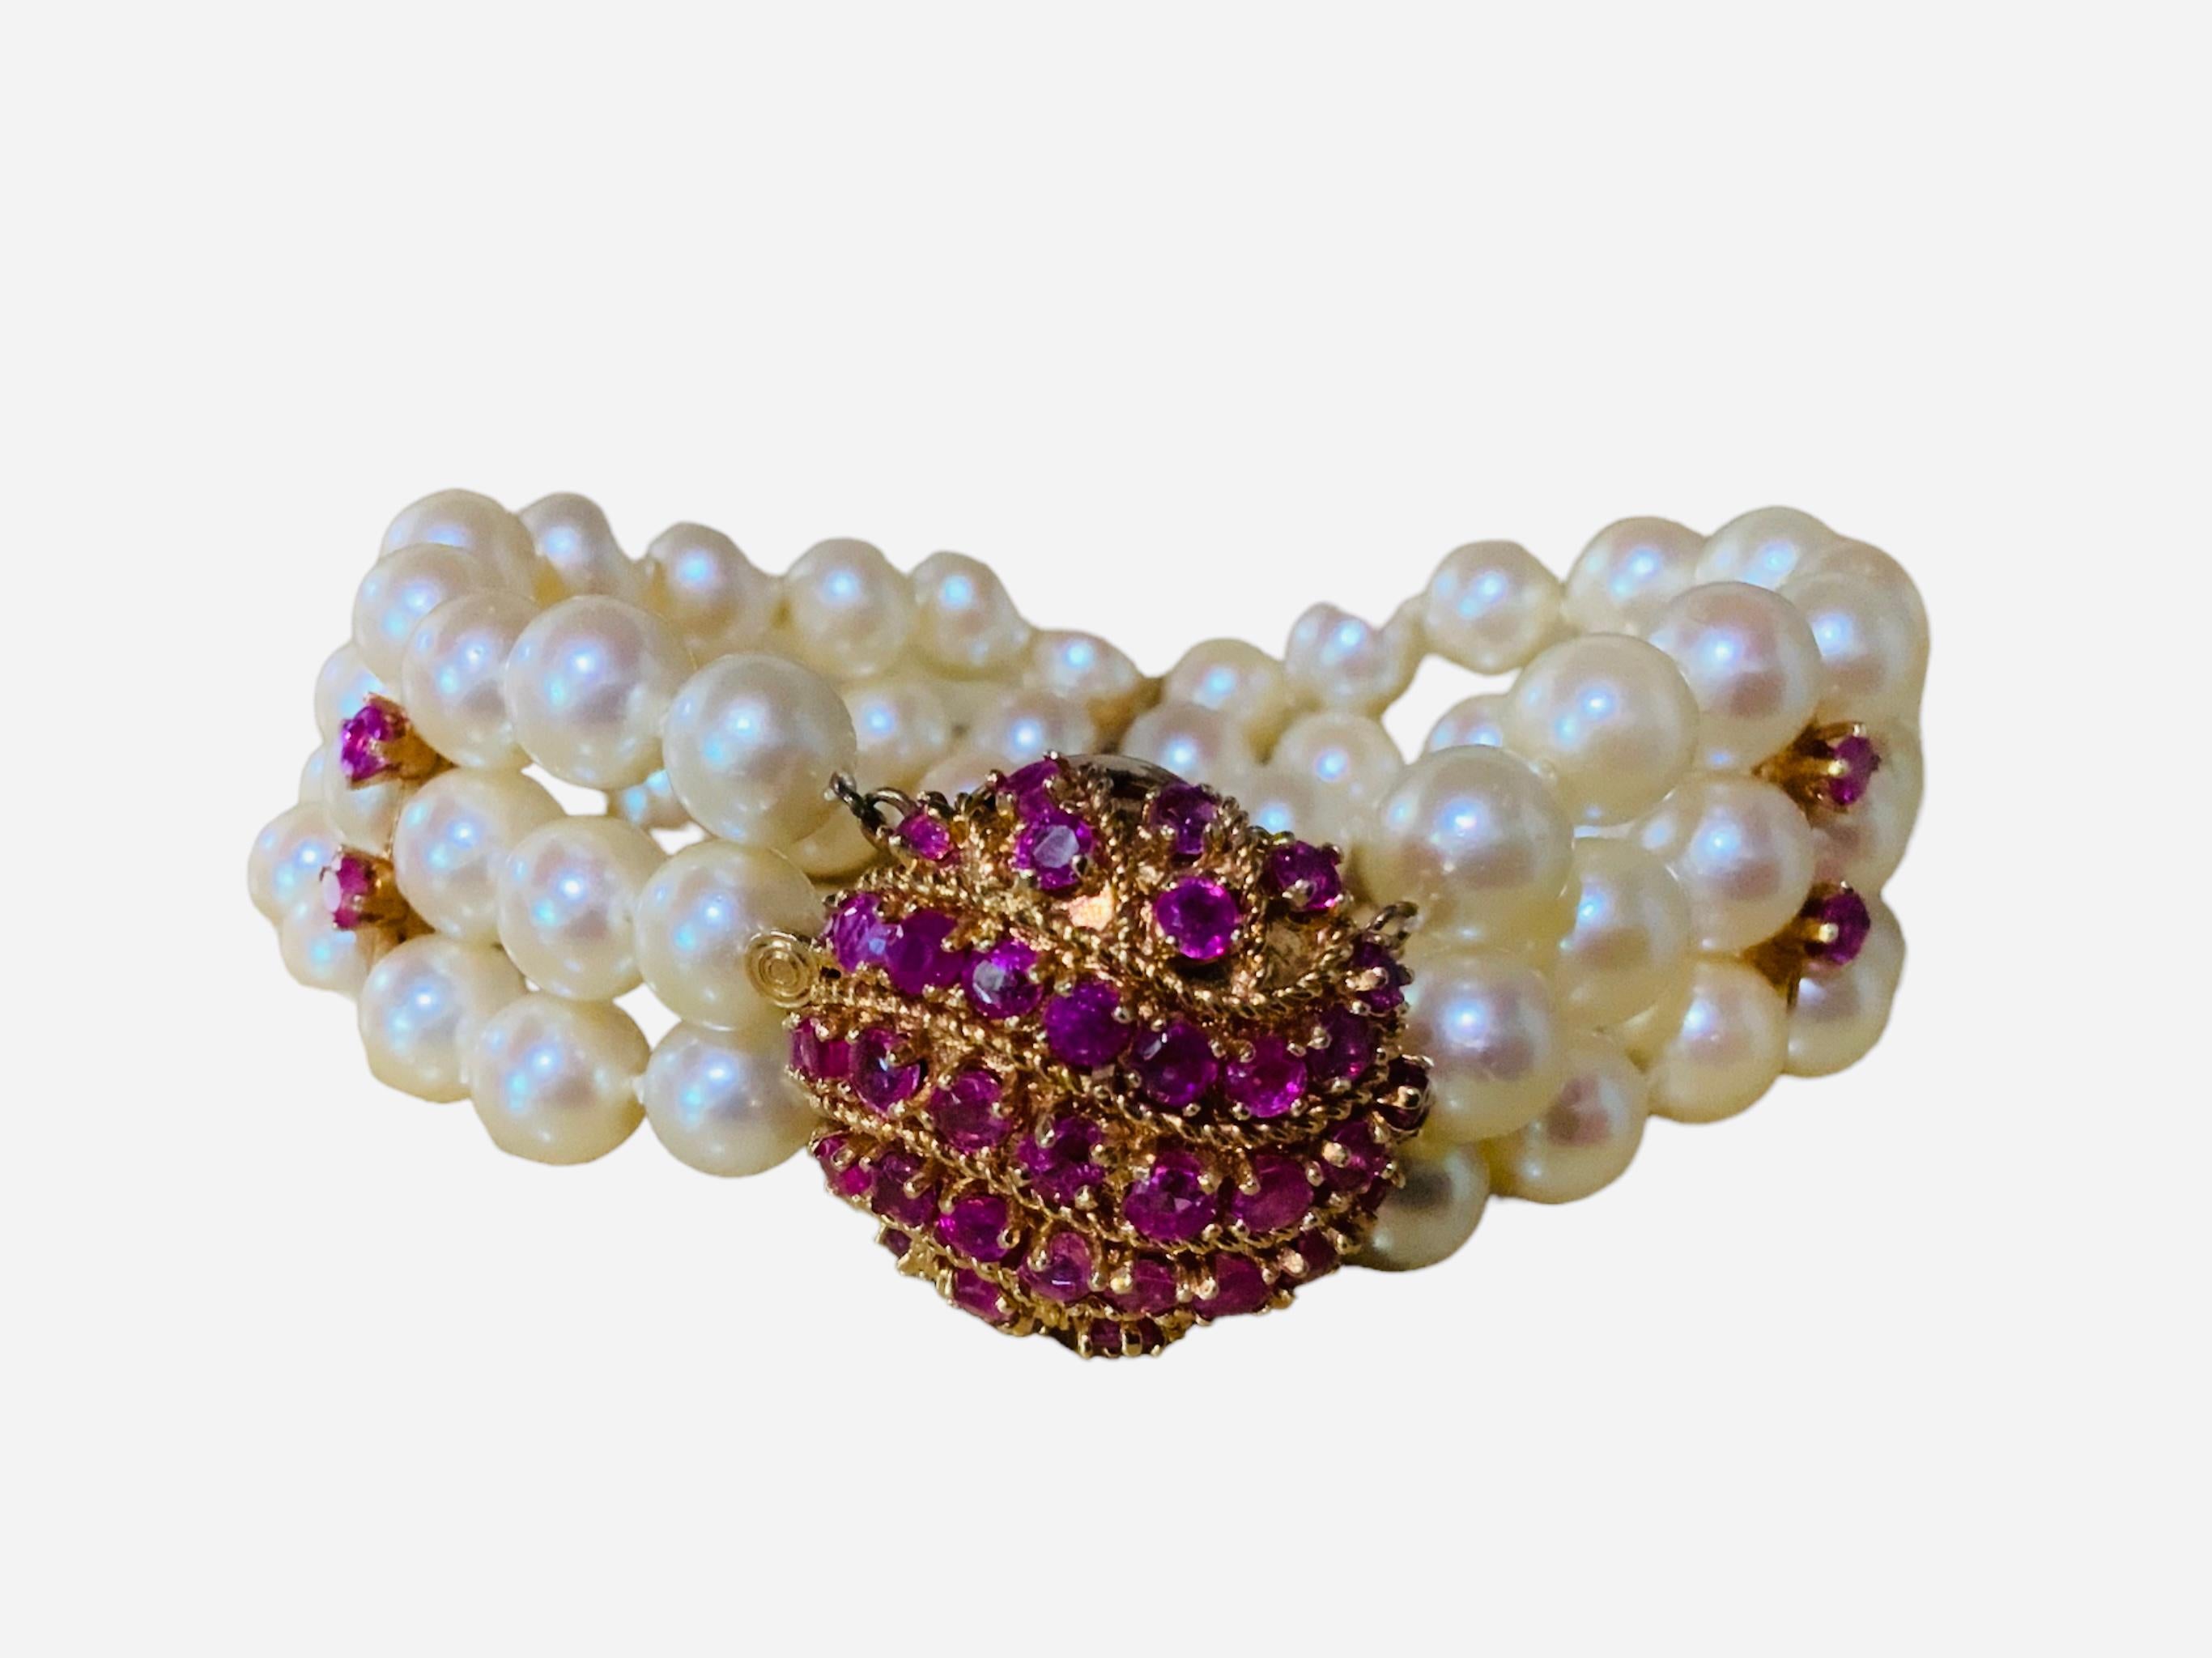 Japanese 14k Gold Culture Pearls and Rubies Bracelet For Sale 1